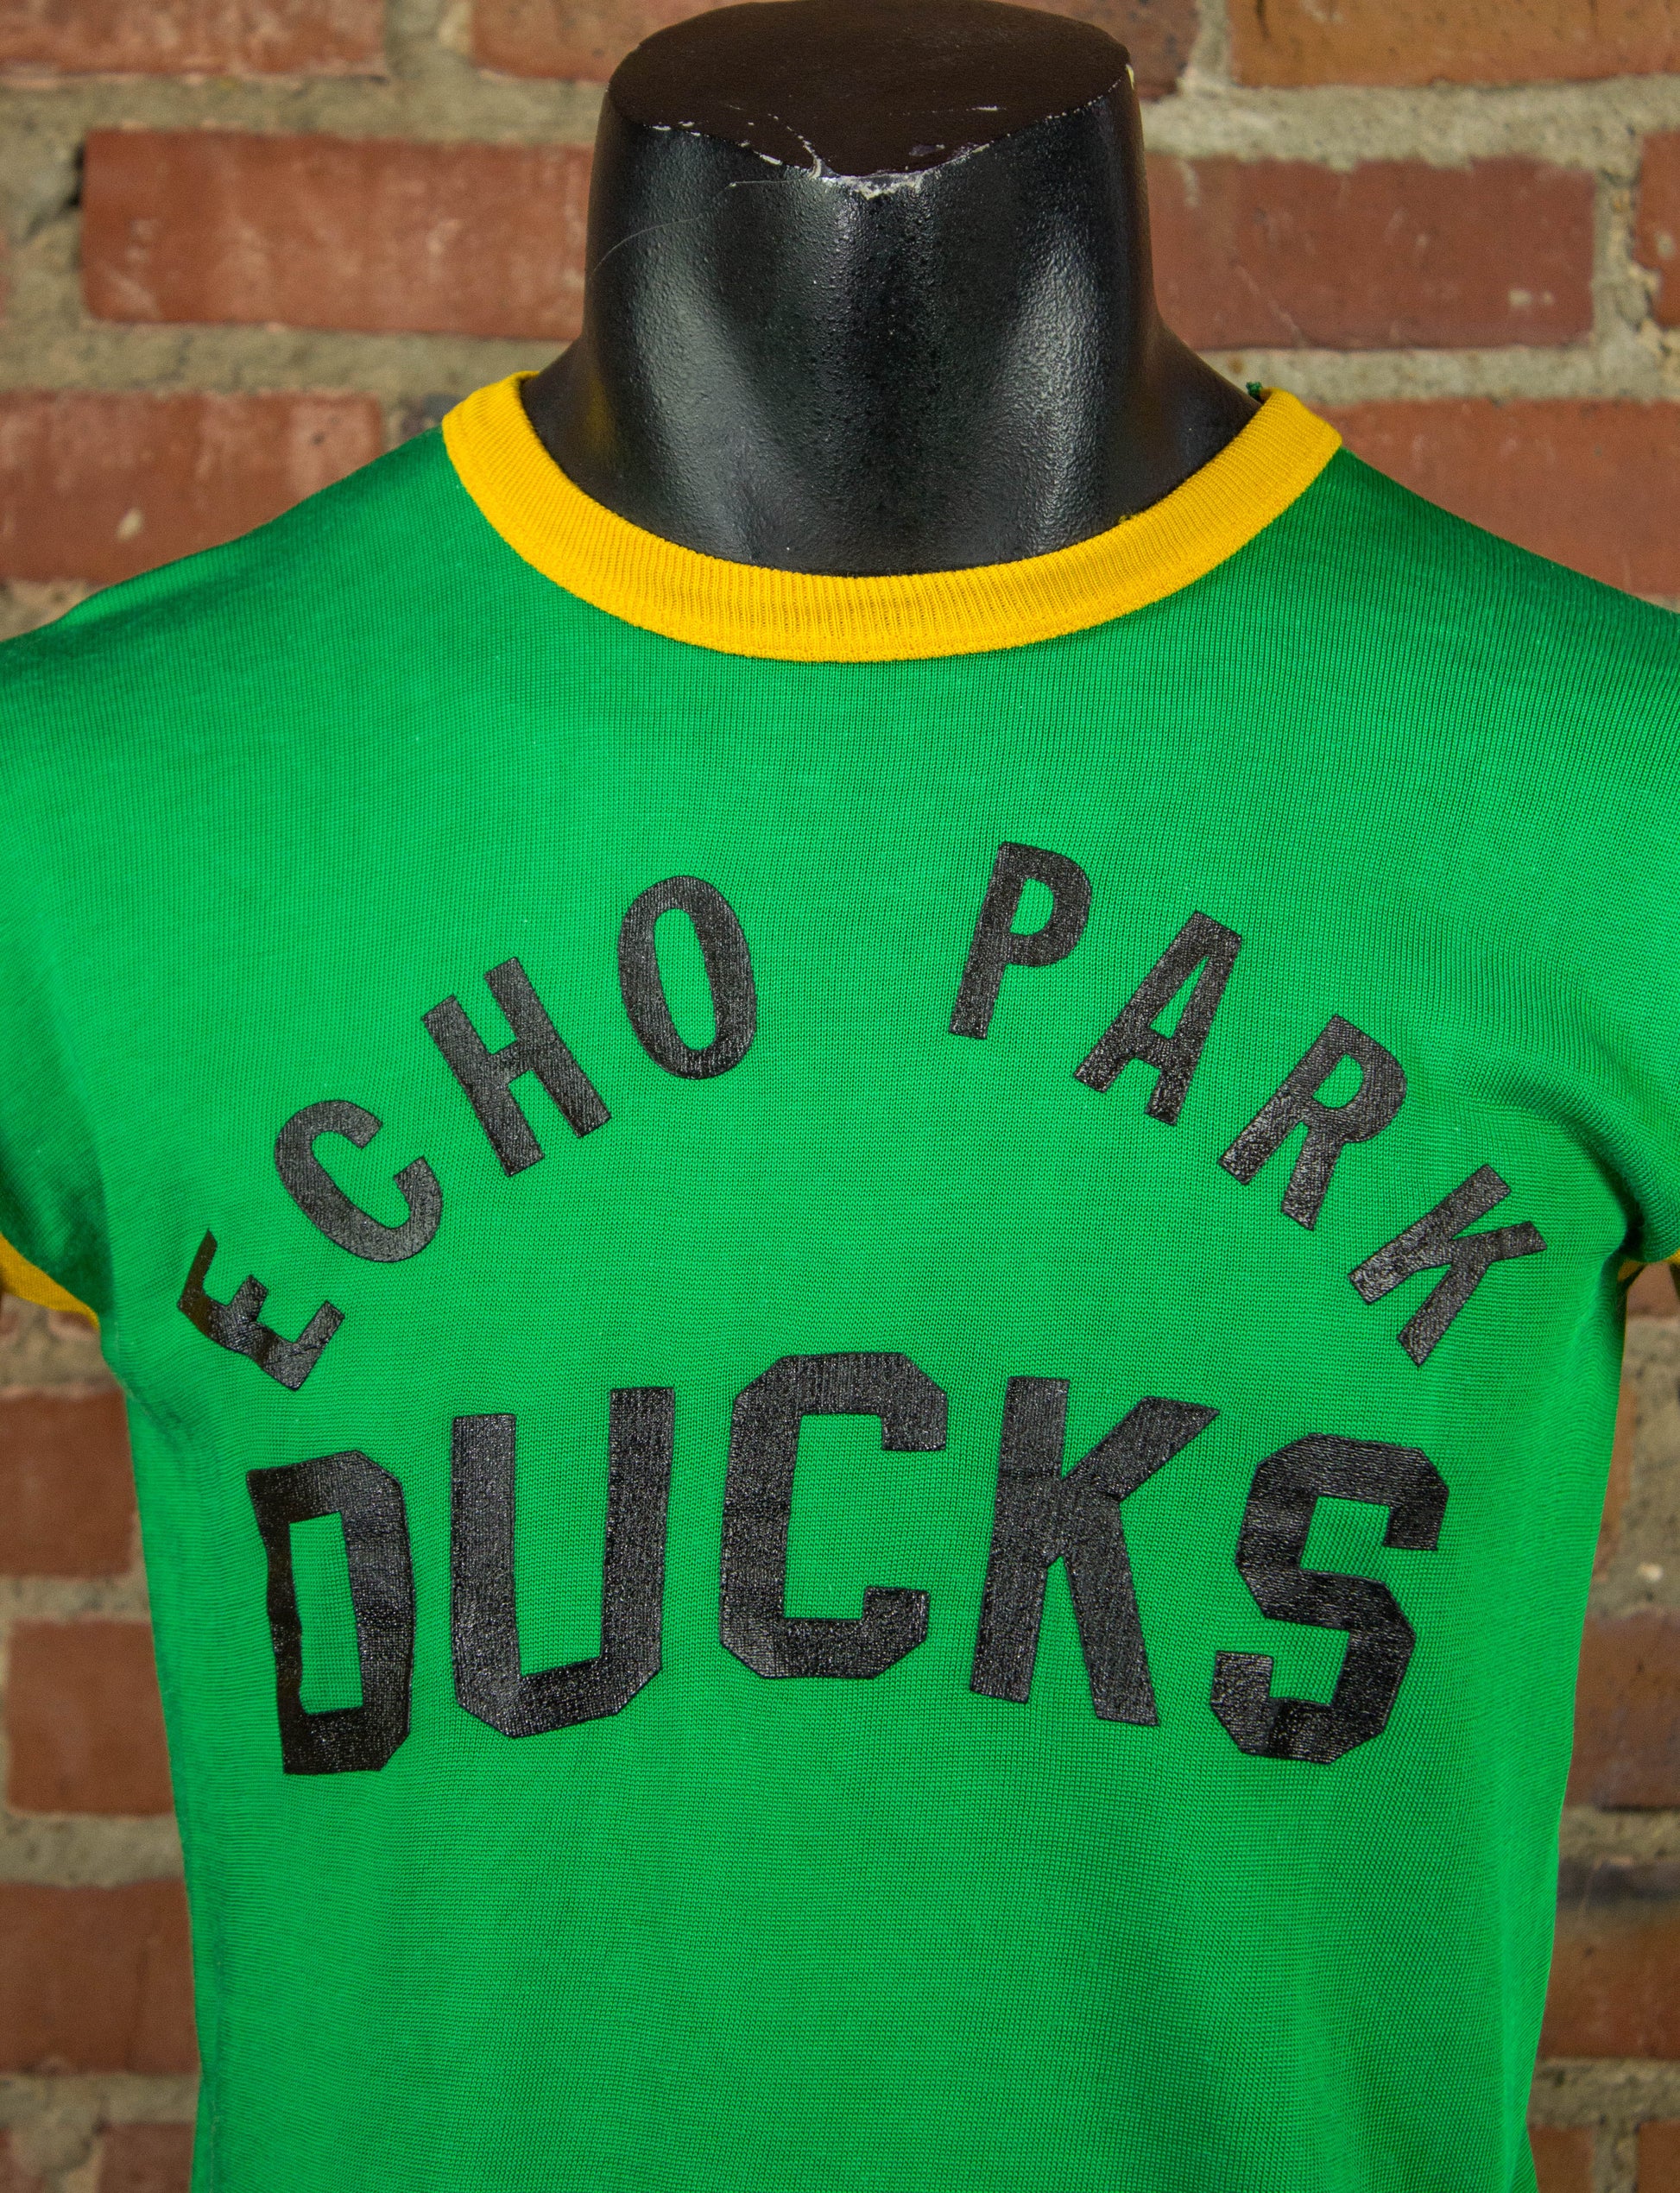 Vintage Echo Park Ducks Softball Team Jersey 60s Green and Yellow Small